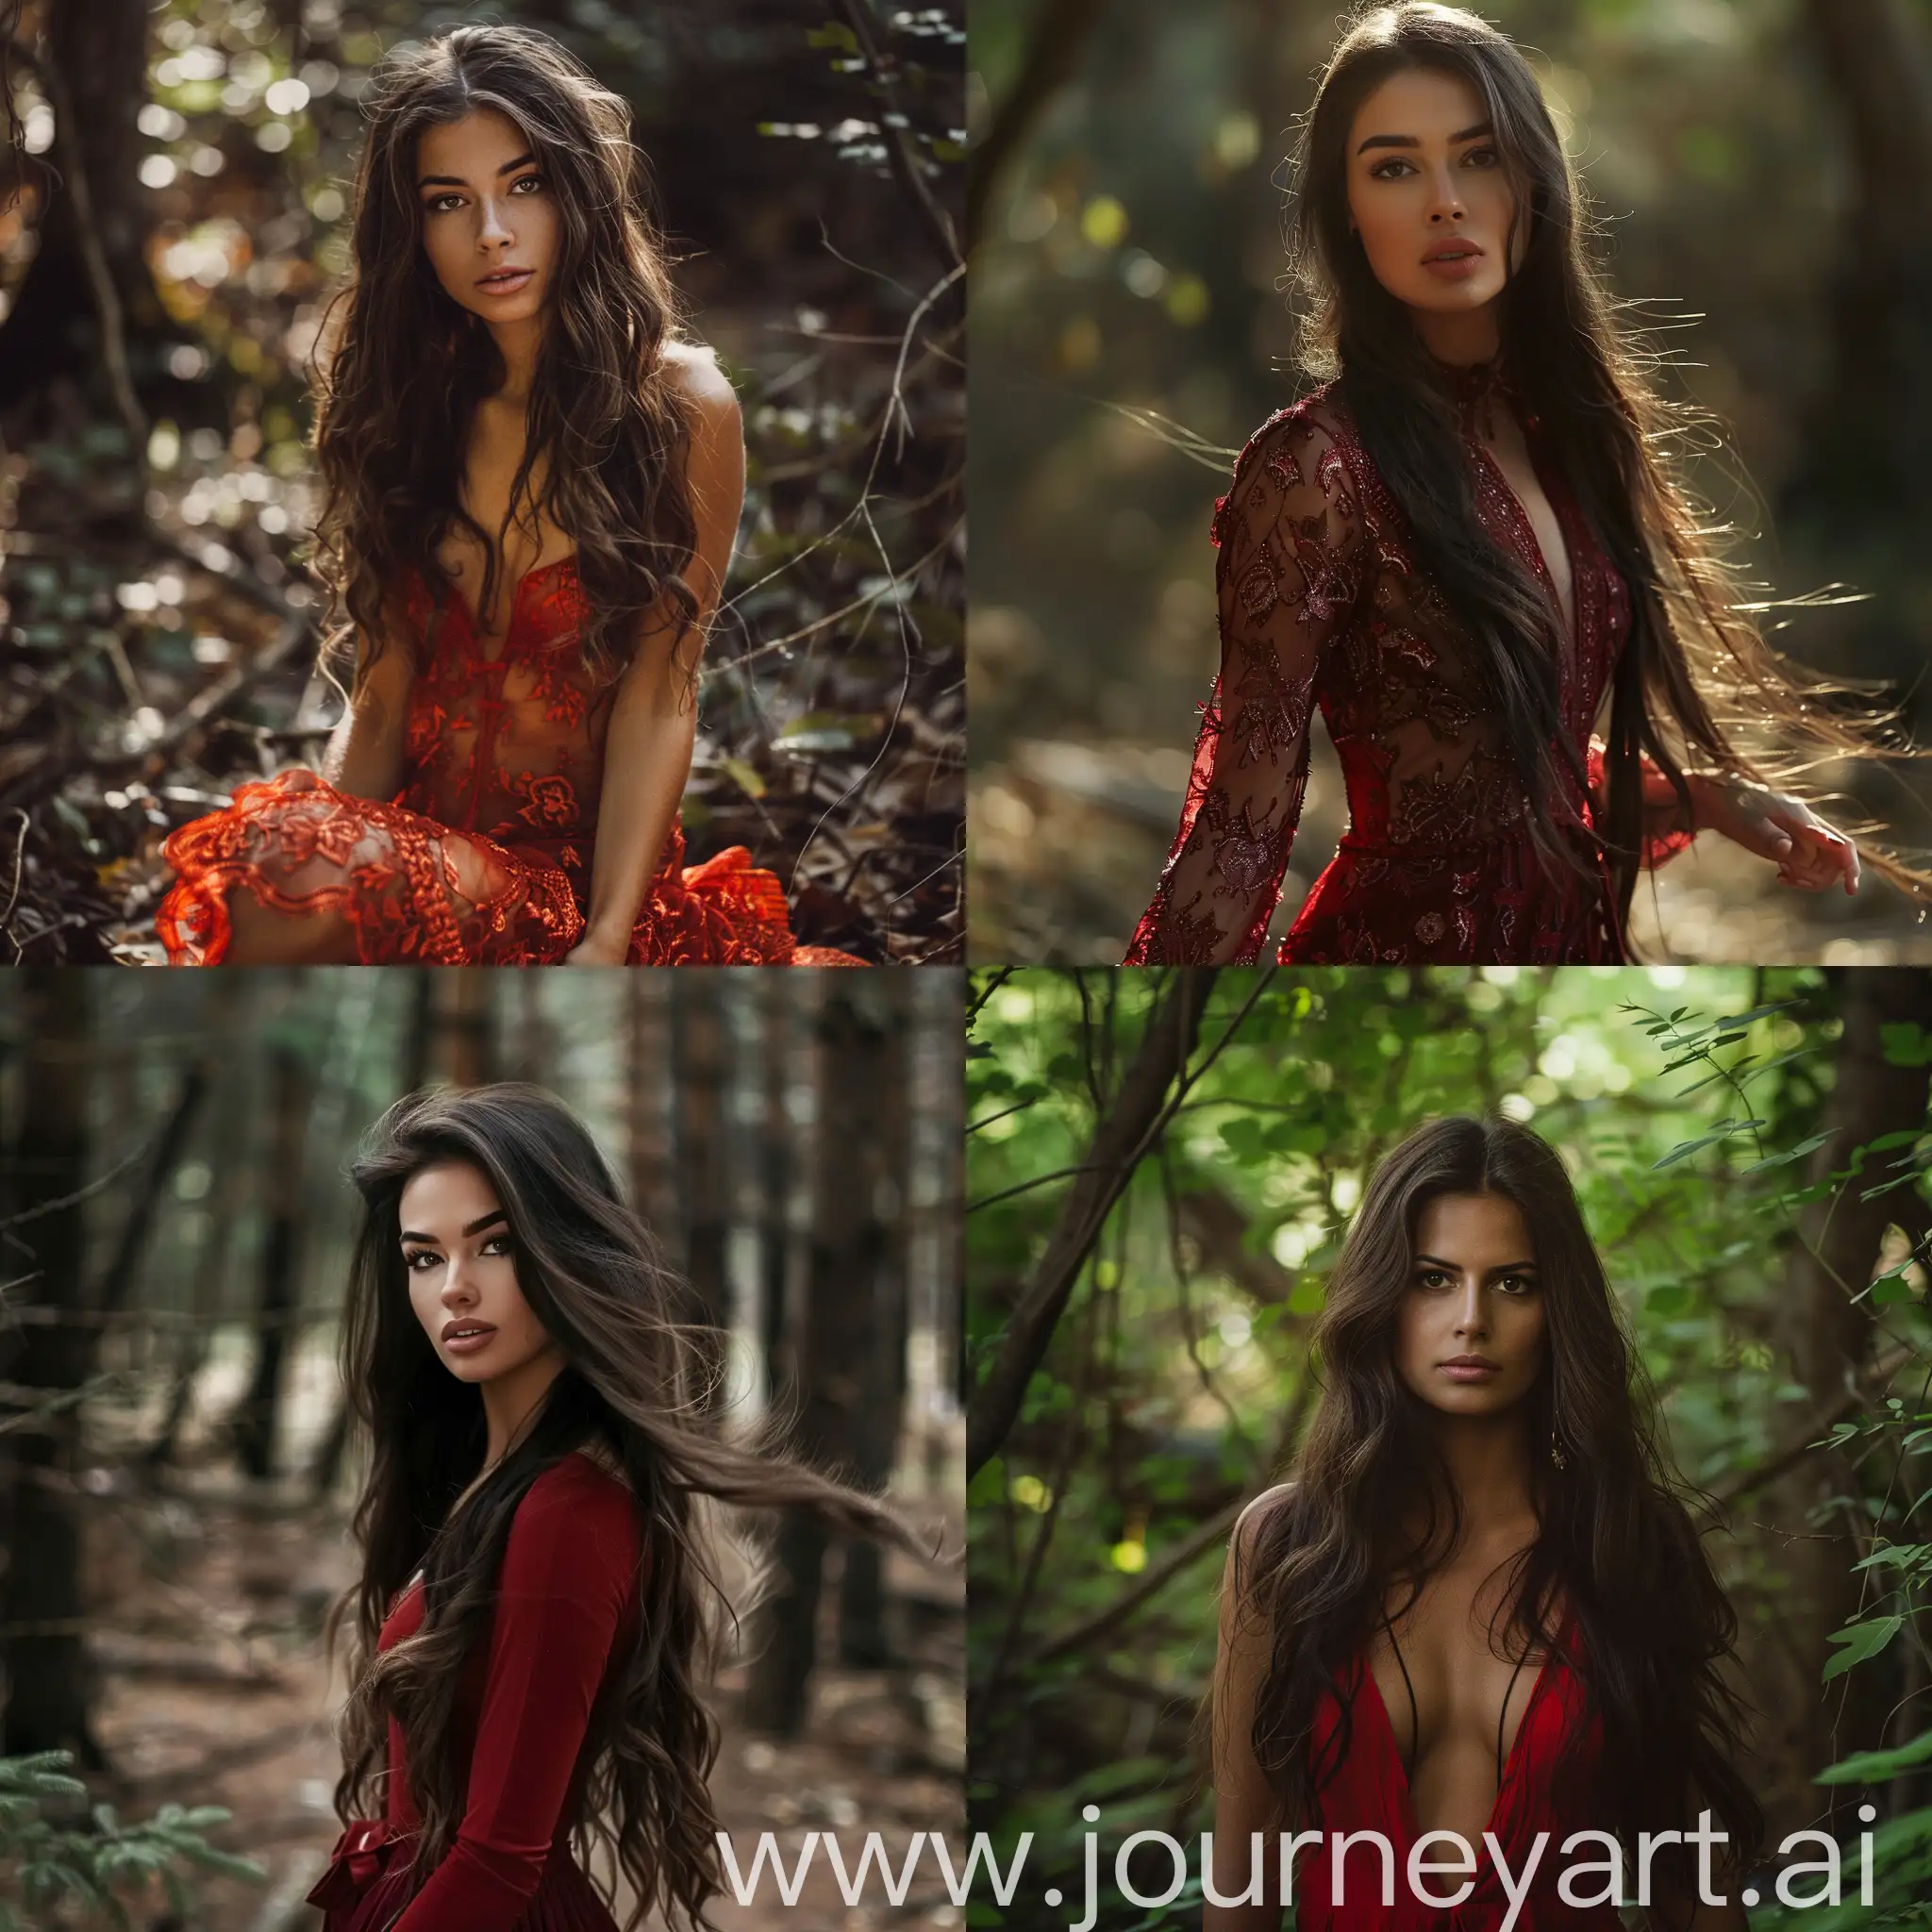 High resolution fashion photo, long hair, brunette girl, full body shot, wearing elegant red dress, super casual, everyday attire, in the forest, flickr